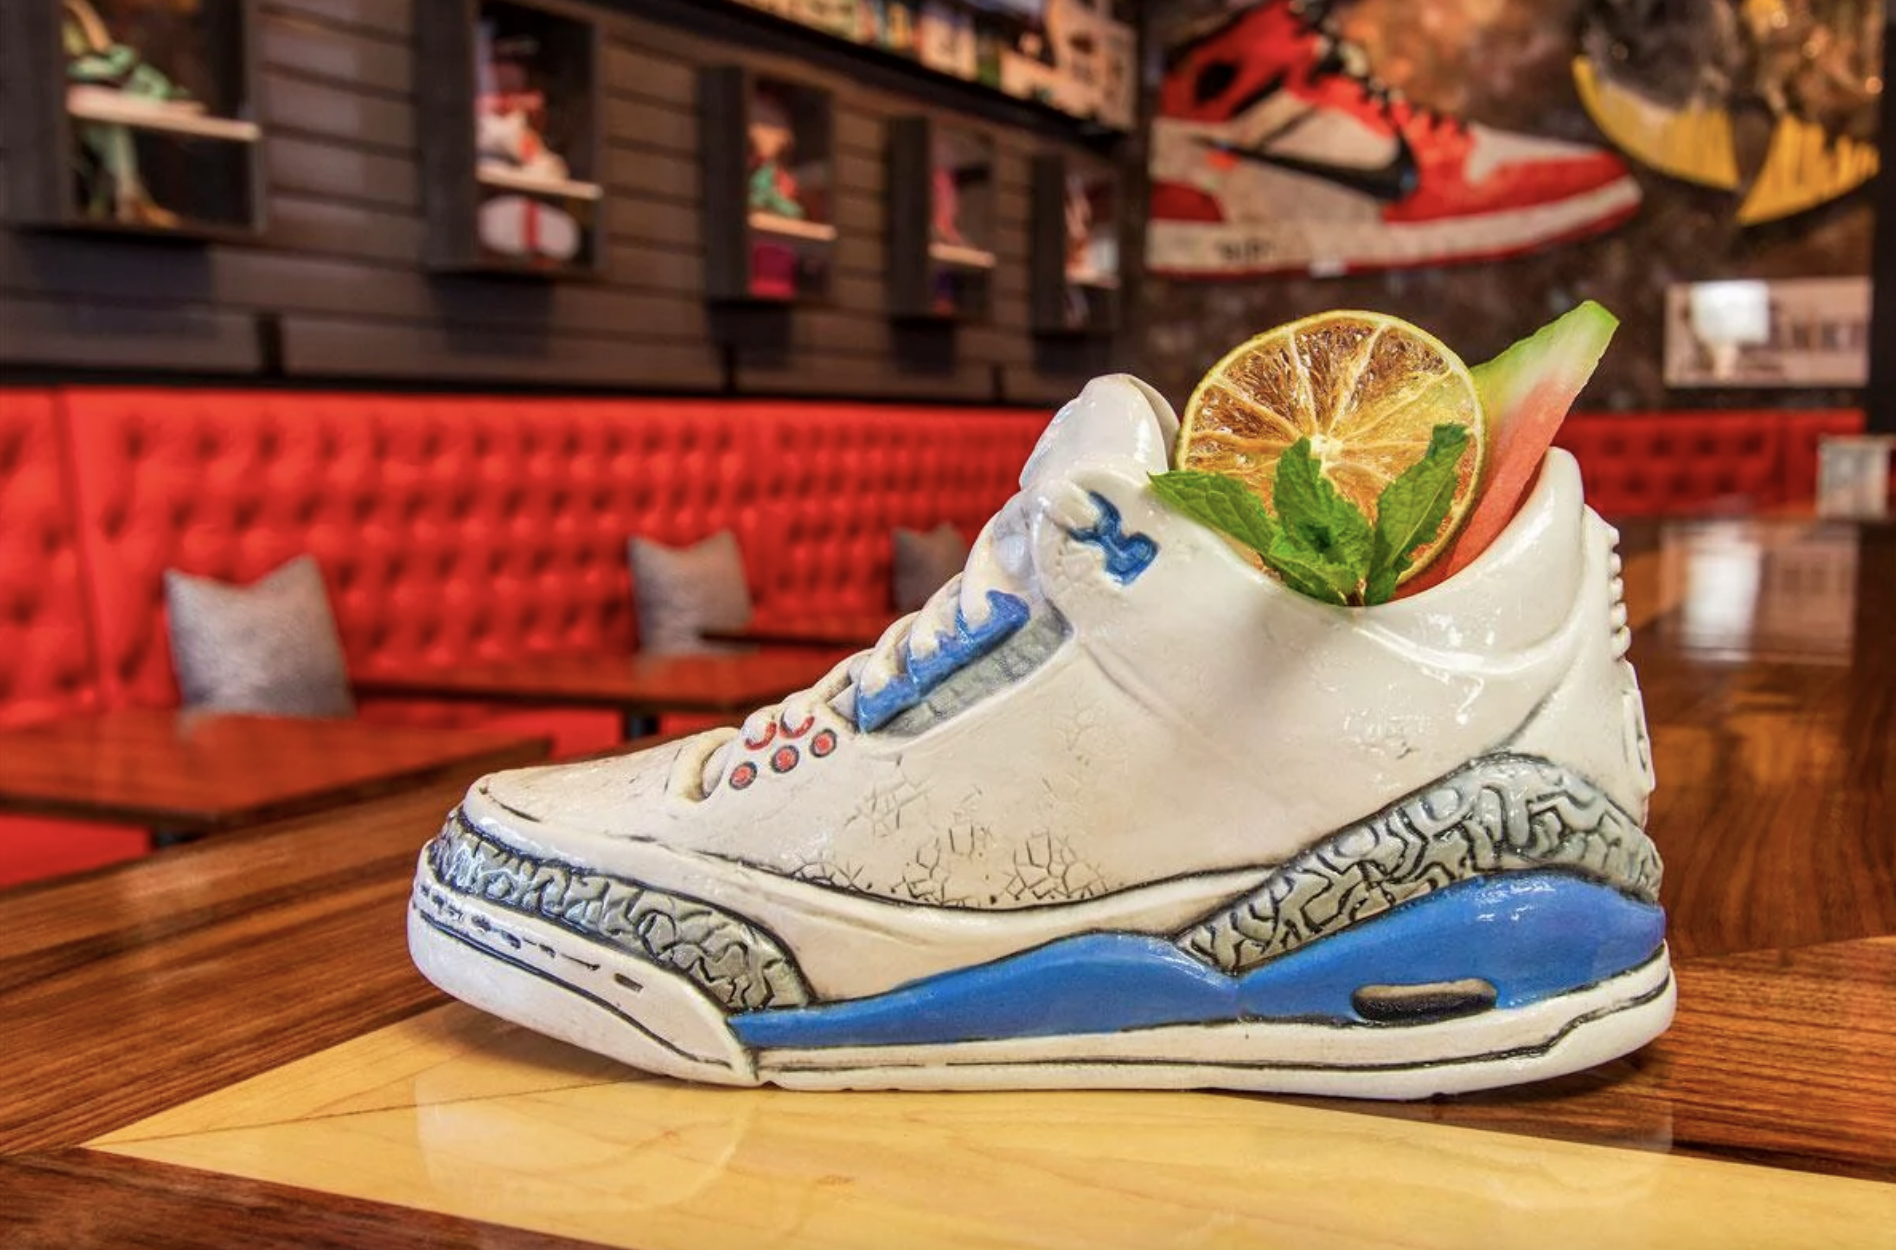 A cocktail in a tennis shoe